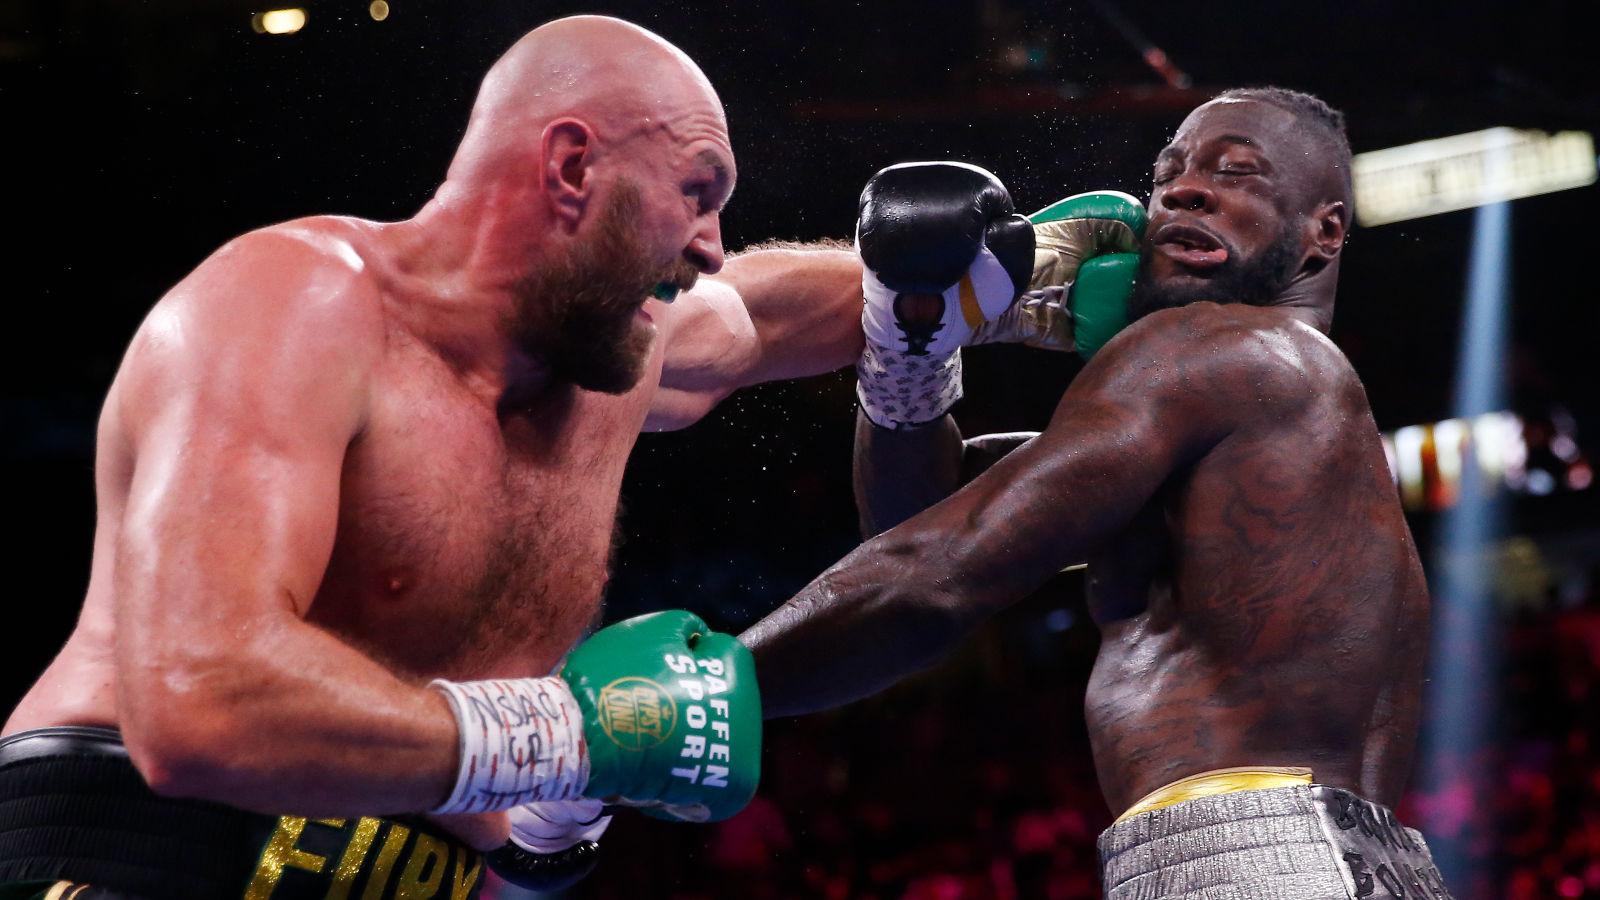 Tyson Fury catches Deontay Wilder with a left hook